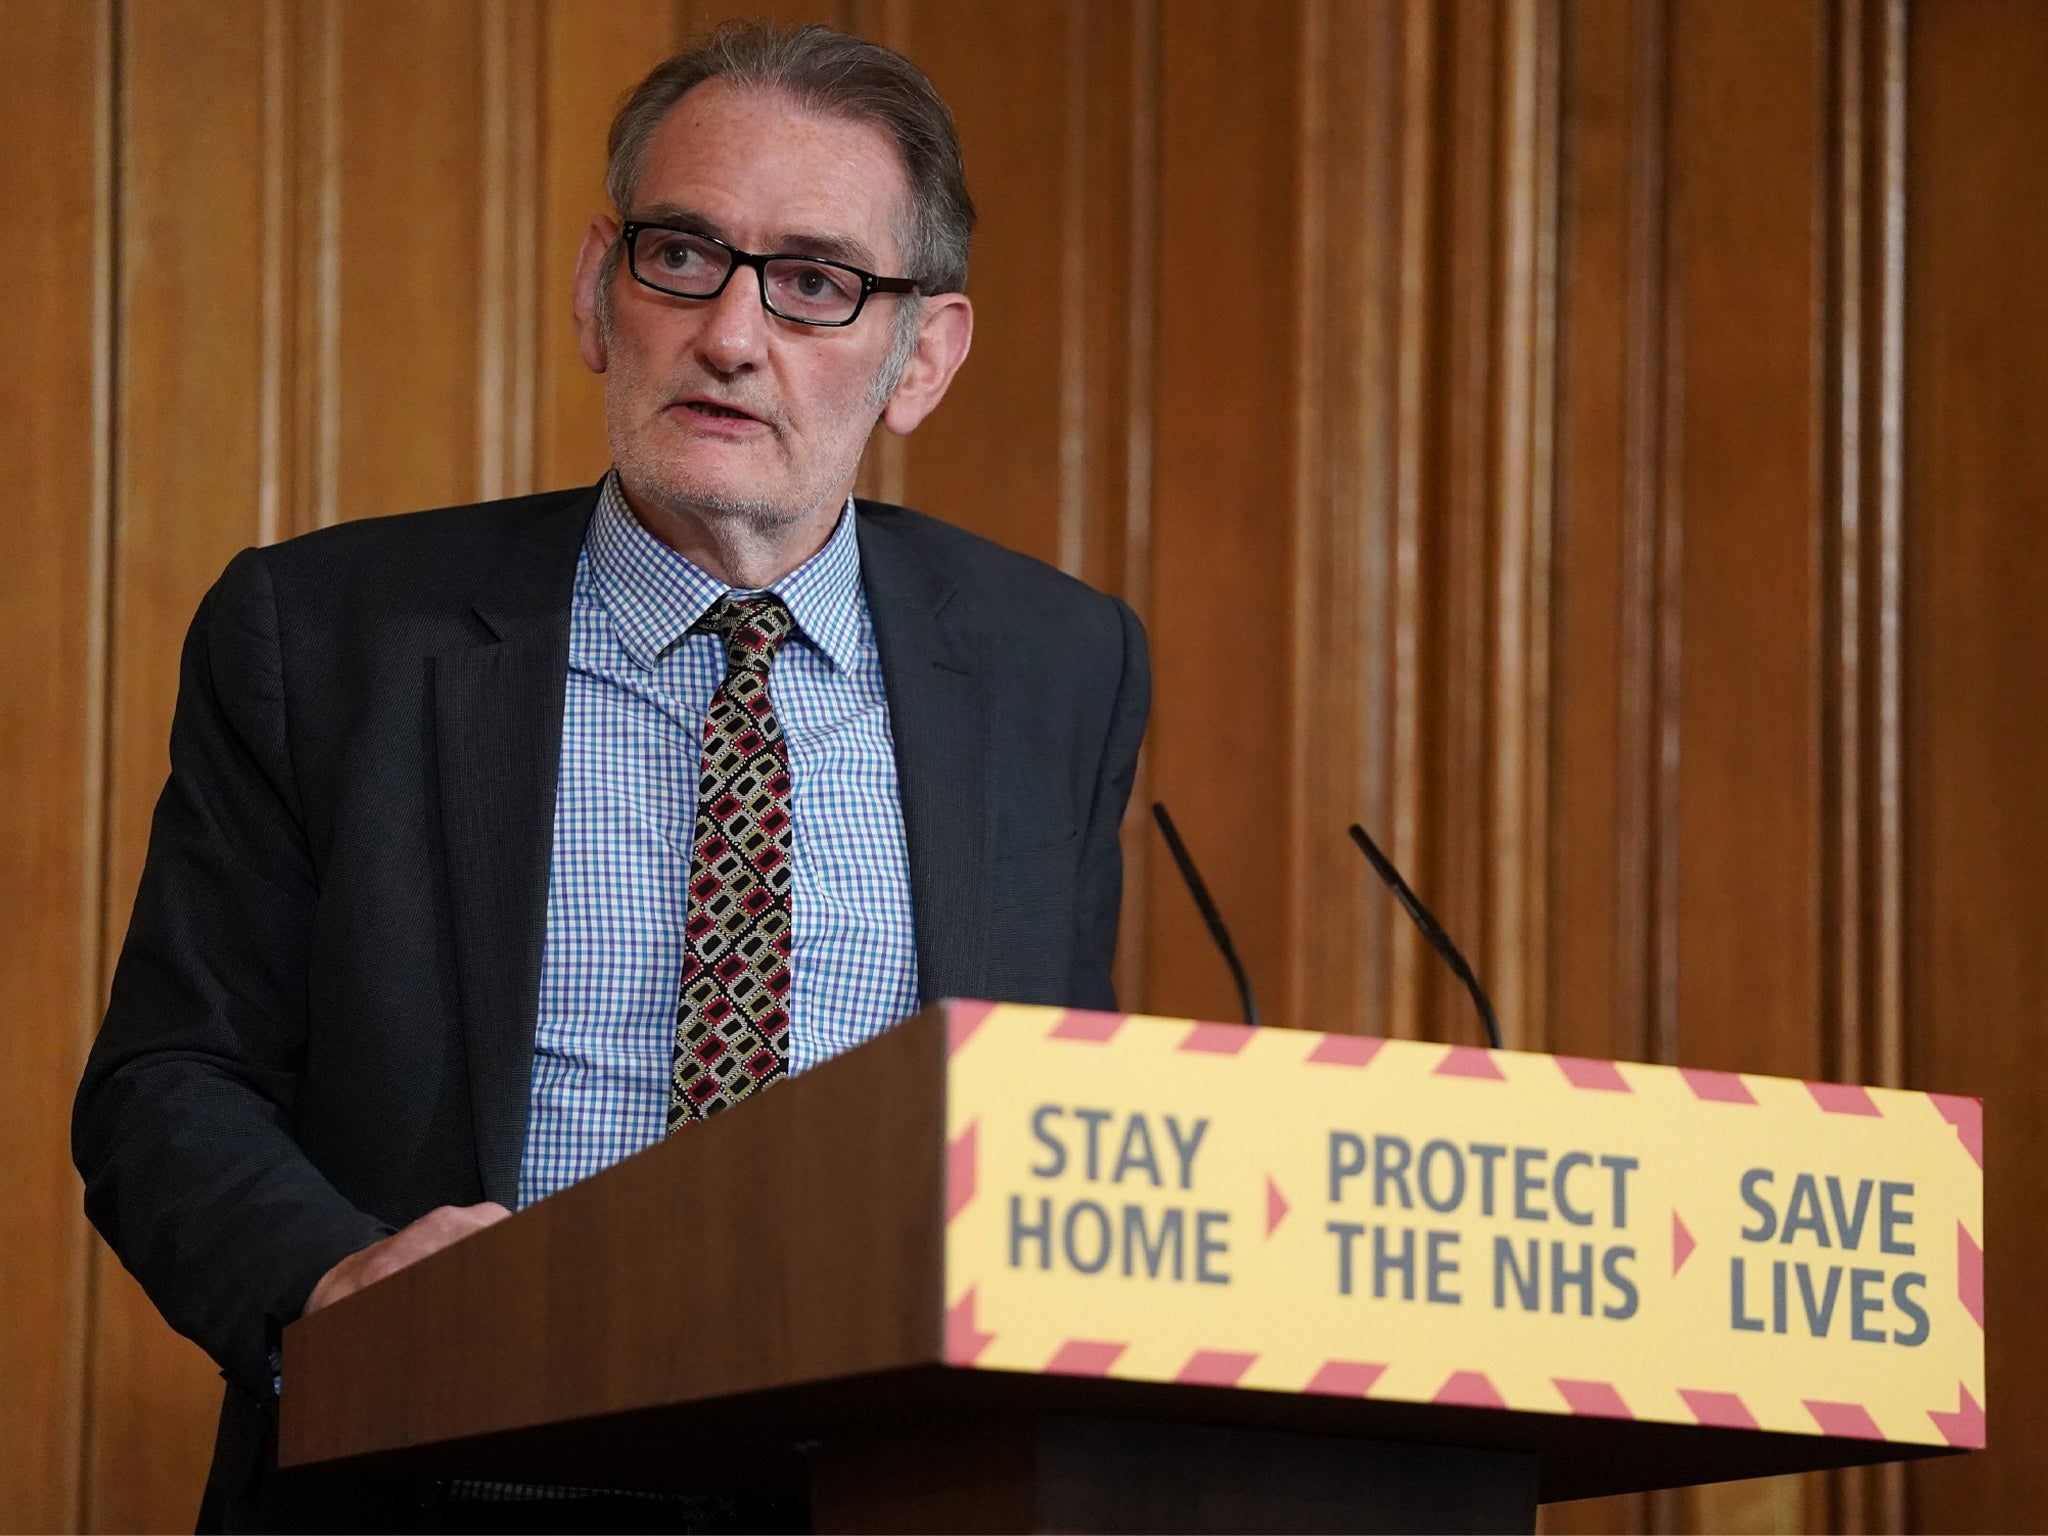 Sir Ian Diamond said ‘we need to recognise that this is a virus that isn’t going to go away’